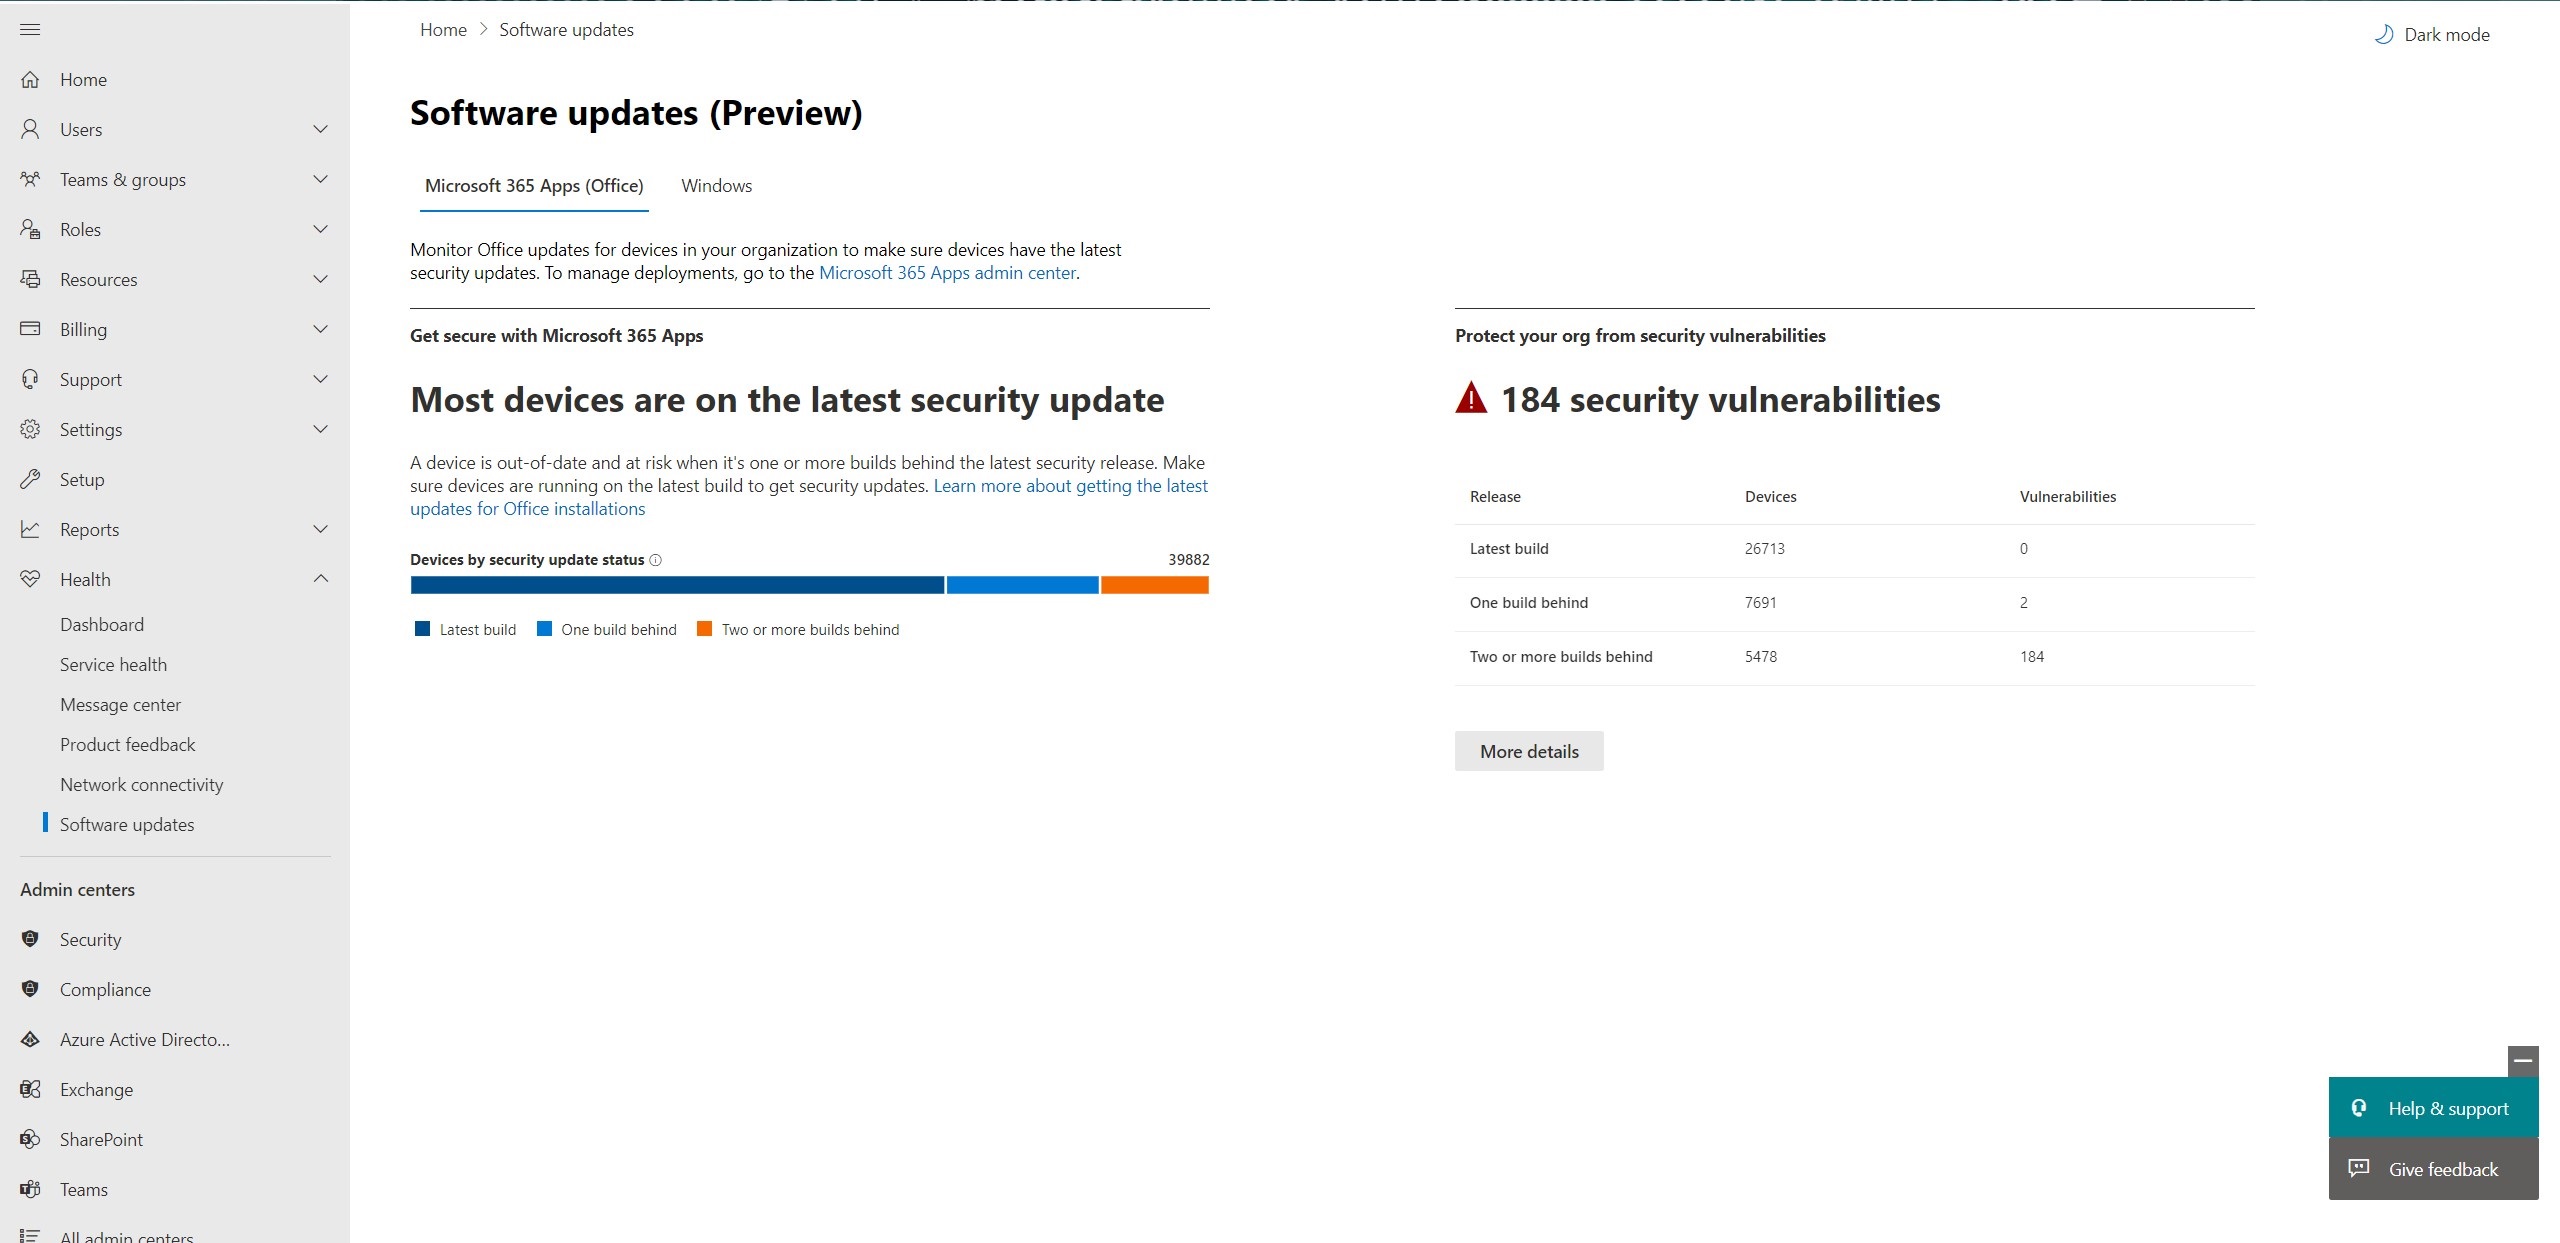 The Software updates page in the Microsoft 365 admin center